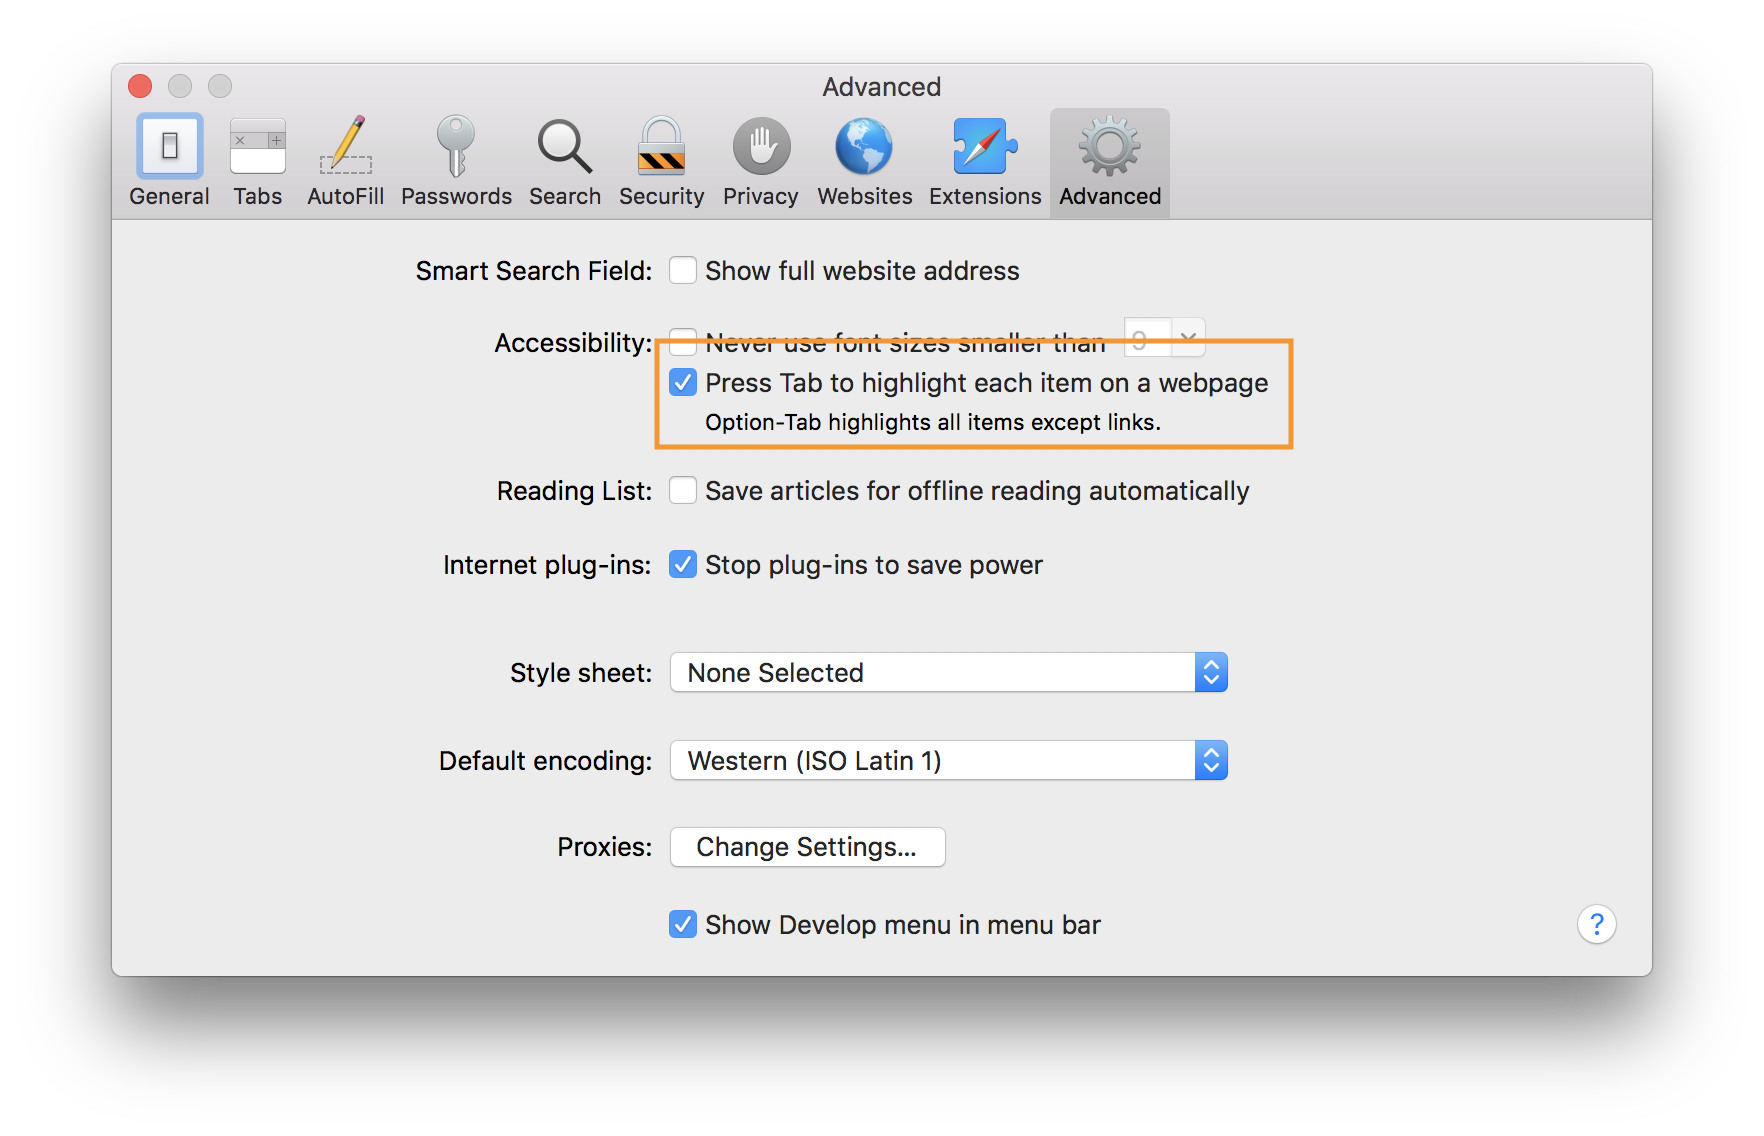 The Safari Preferences window. The screenshot is highlighting the selection of the 'Press Tab to highlight each item on a webpage' checkbox.